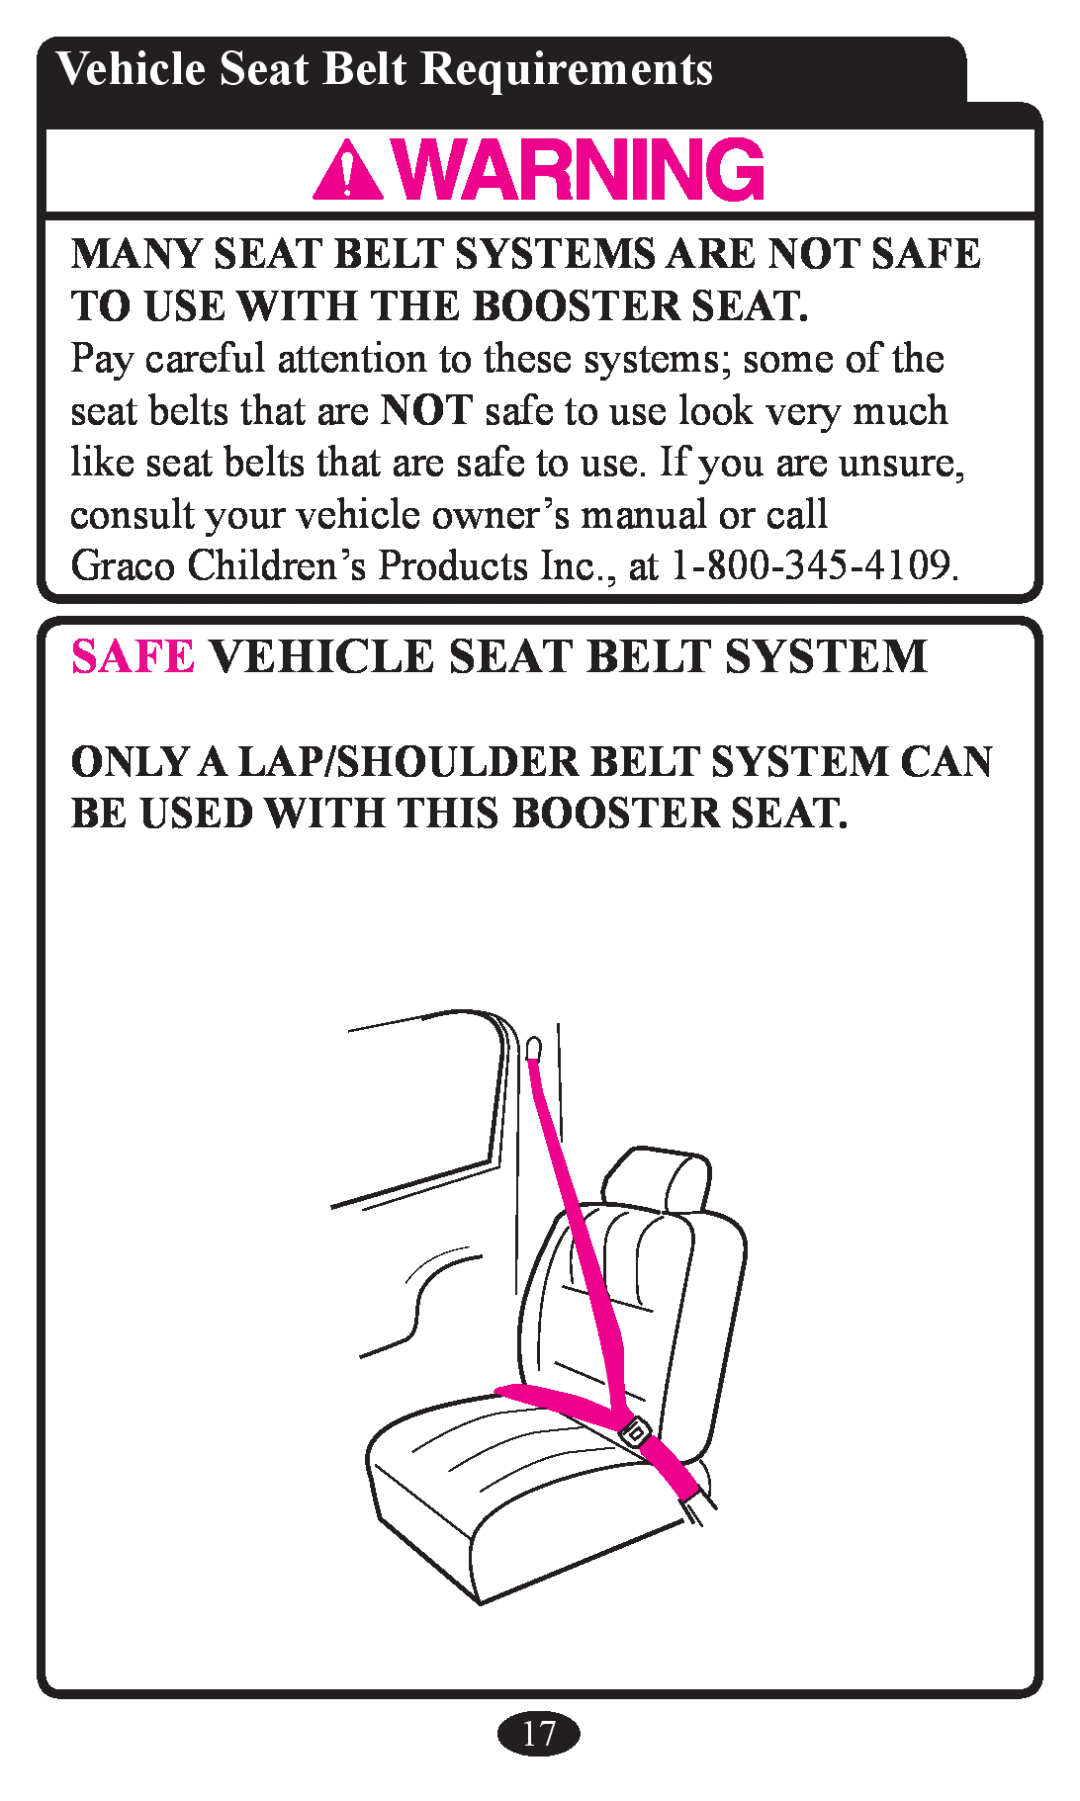 Graco Booster Seat owner manual Vehicle Seat Belt Requirements, Safe Vehicle Seat Belt System 